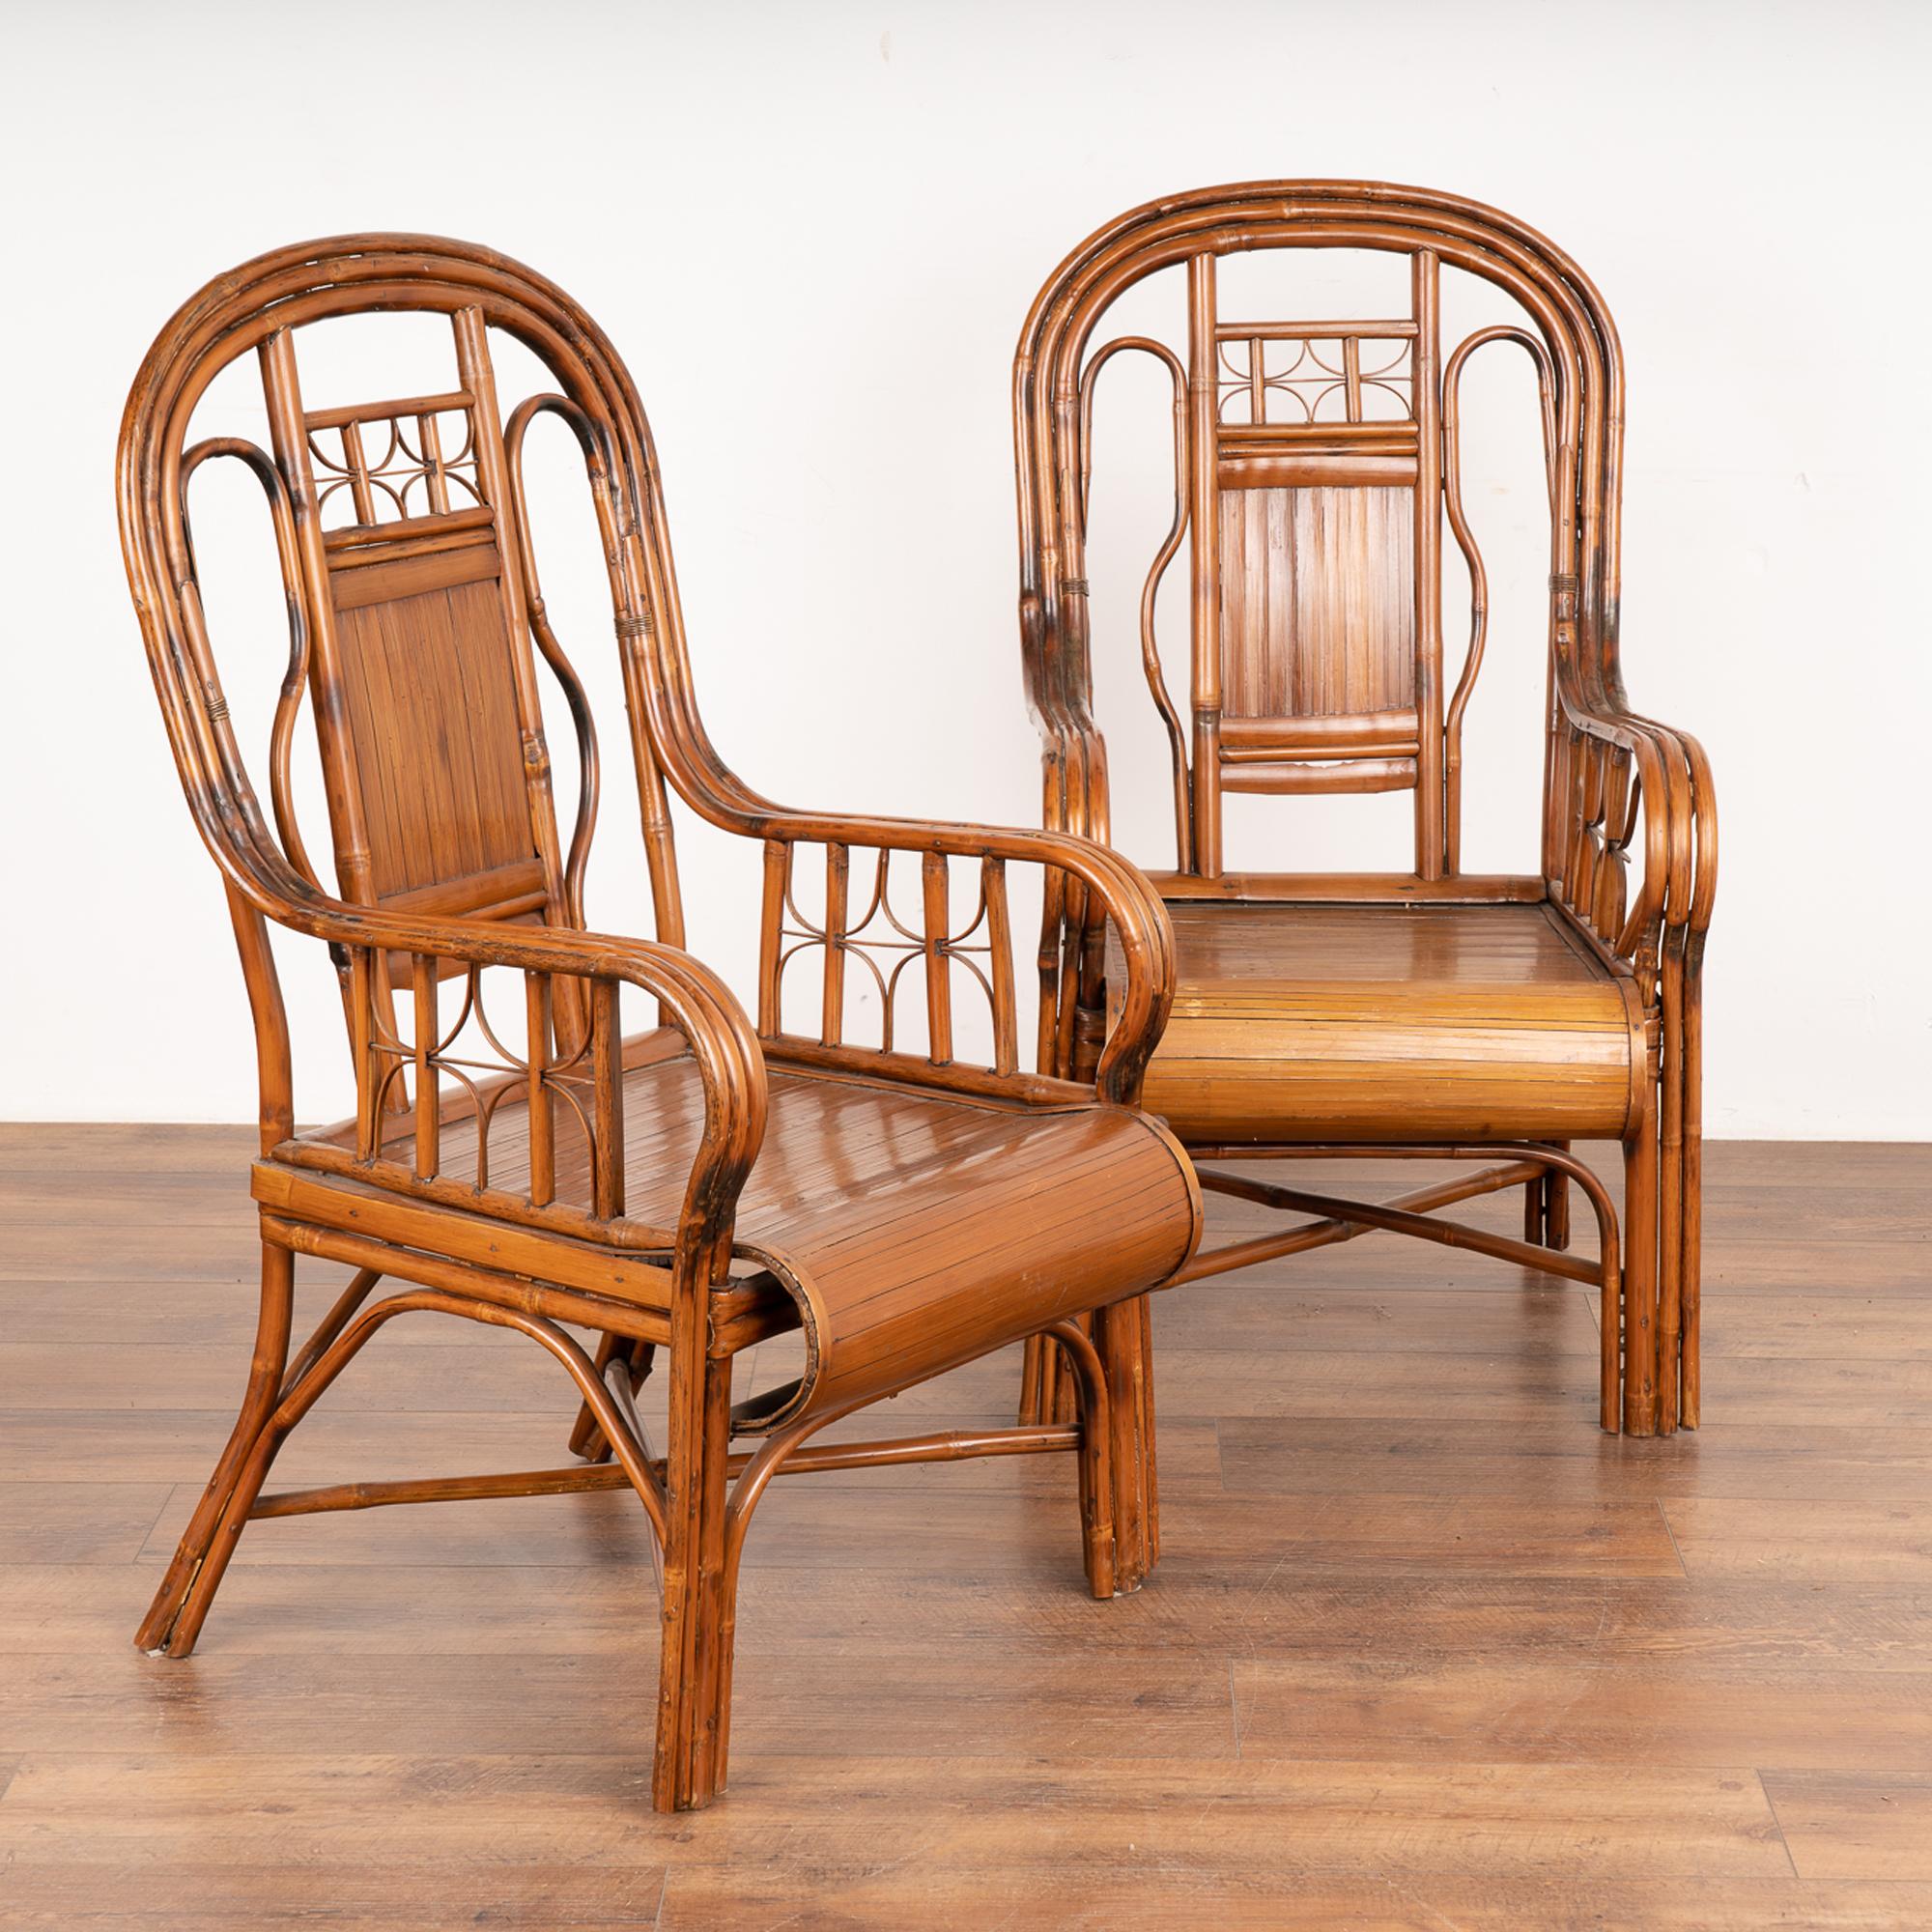 Bamboo arm chairs with curved arms and seats. 
These timeless armchairs sit low and firm; they are in solid/stable condition and are ready to be placed and used.
Any scratches, cracks, dings, discoloration, missing/loose parts or age related